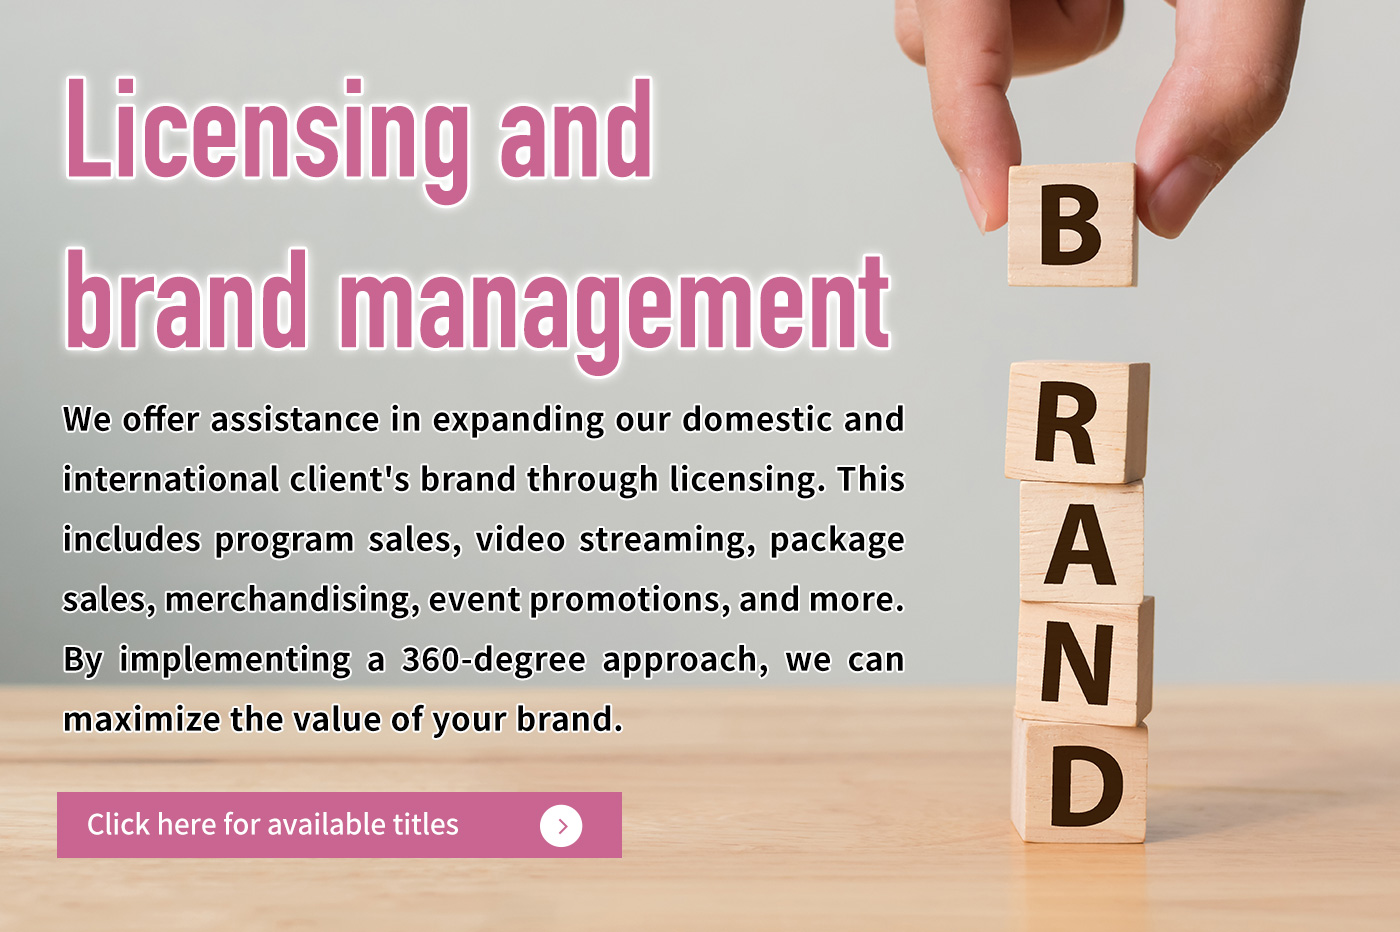 Licensing and brand management